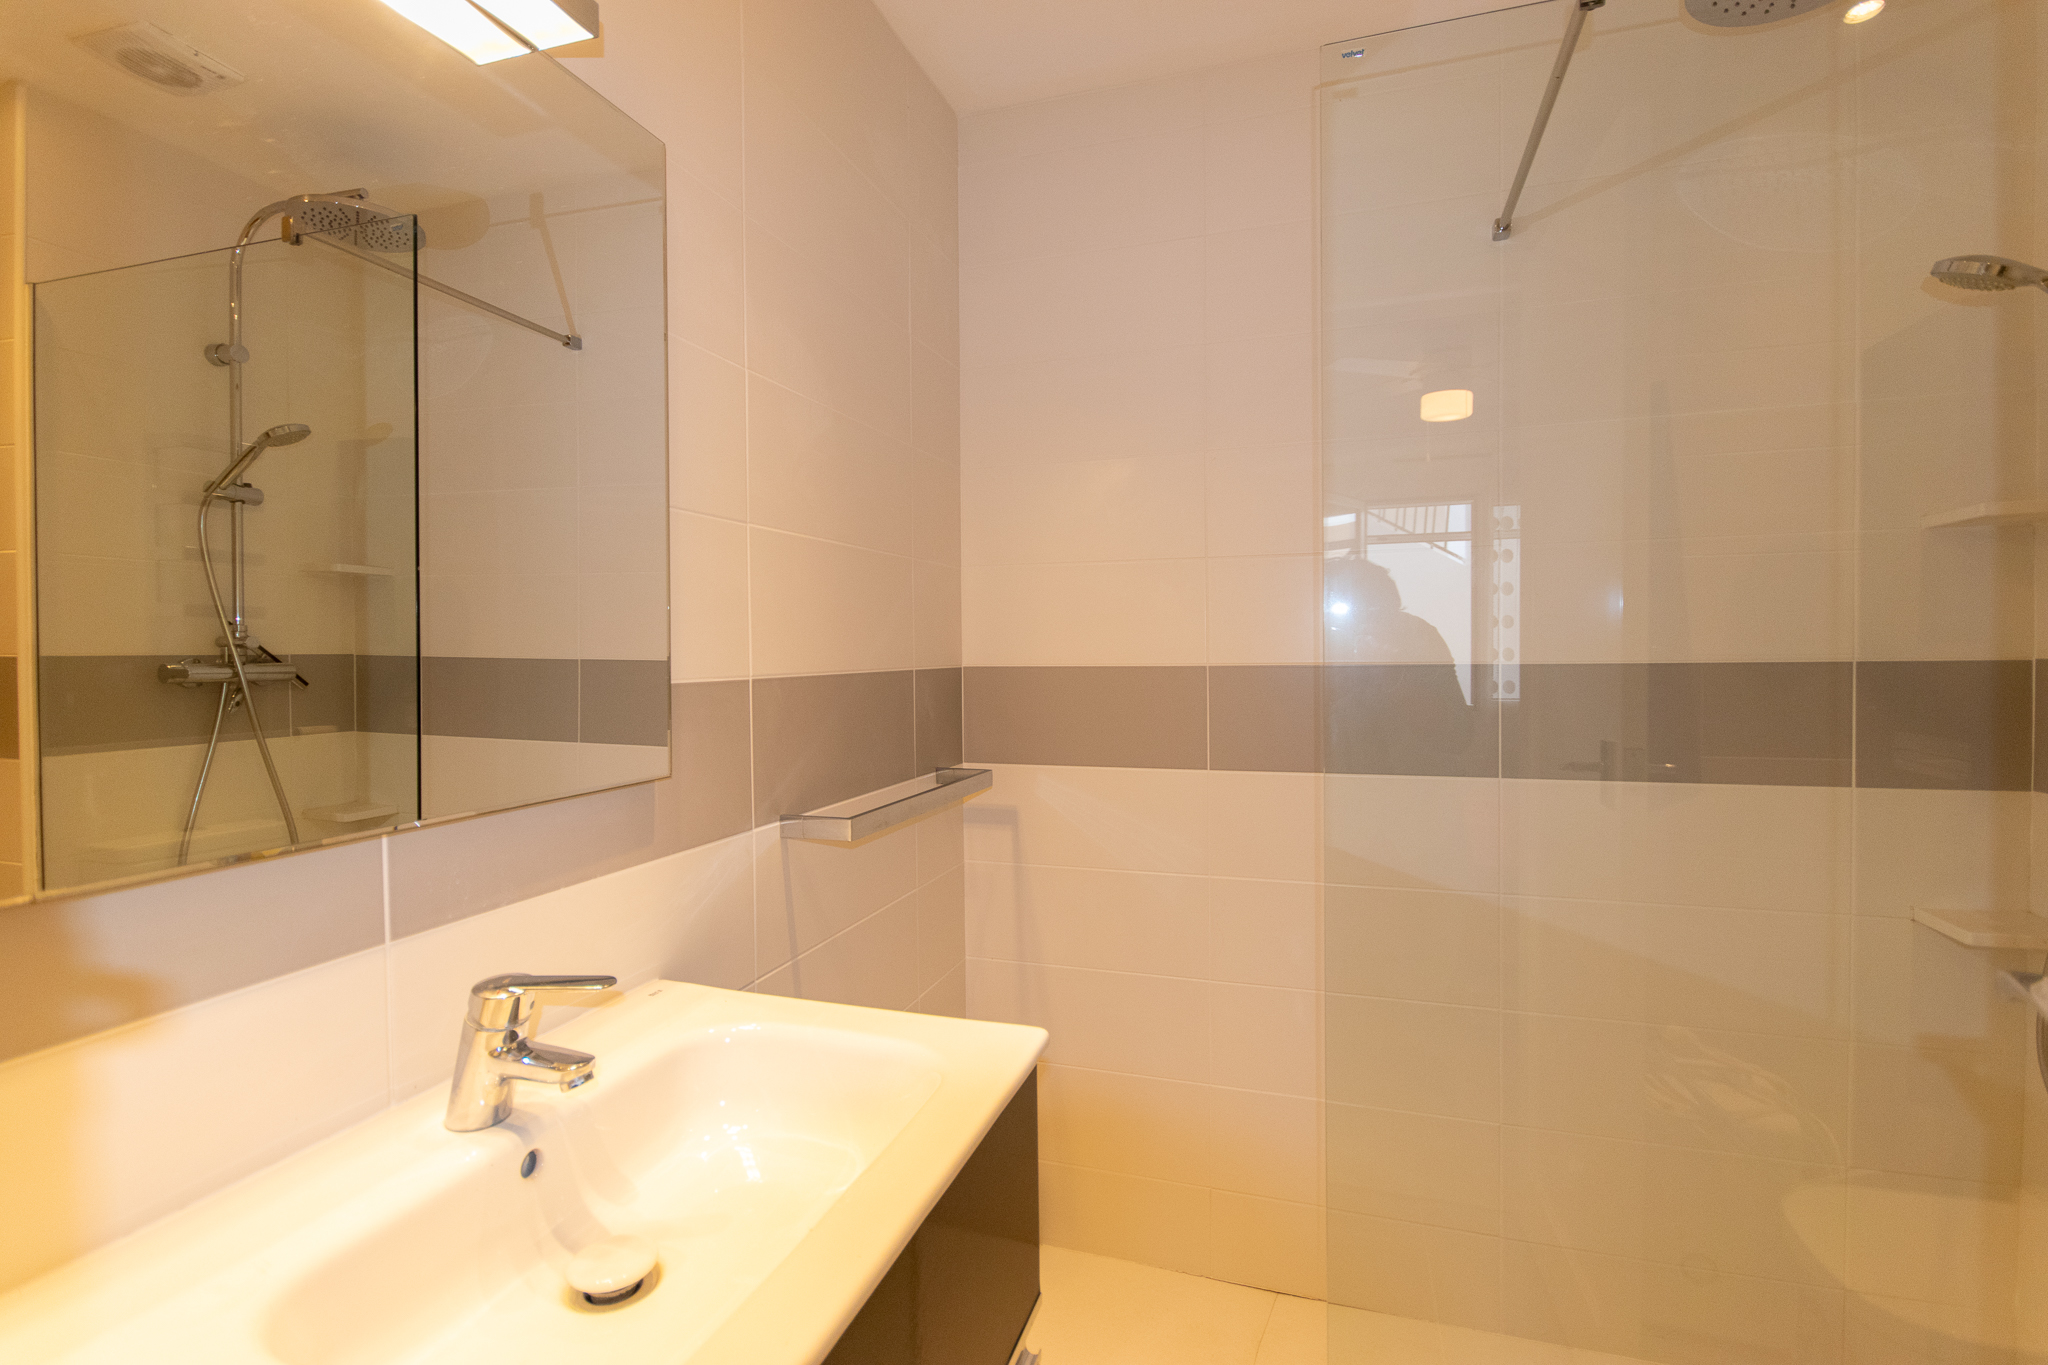 En-suite bathroom apartment with terrace and pool for sale in Son Parc